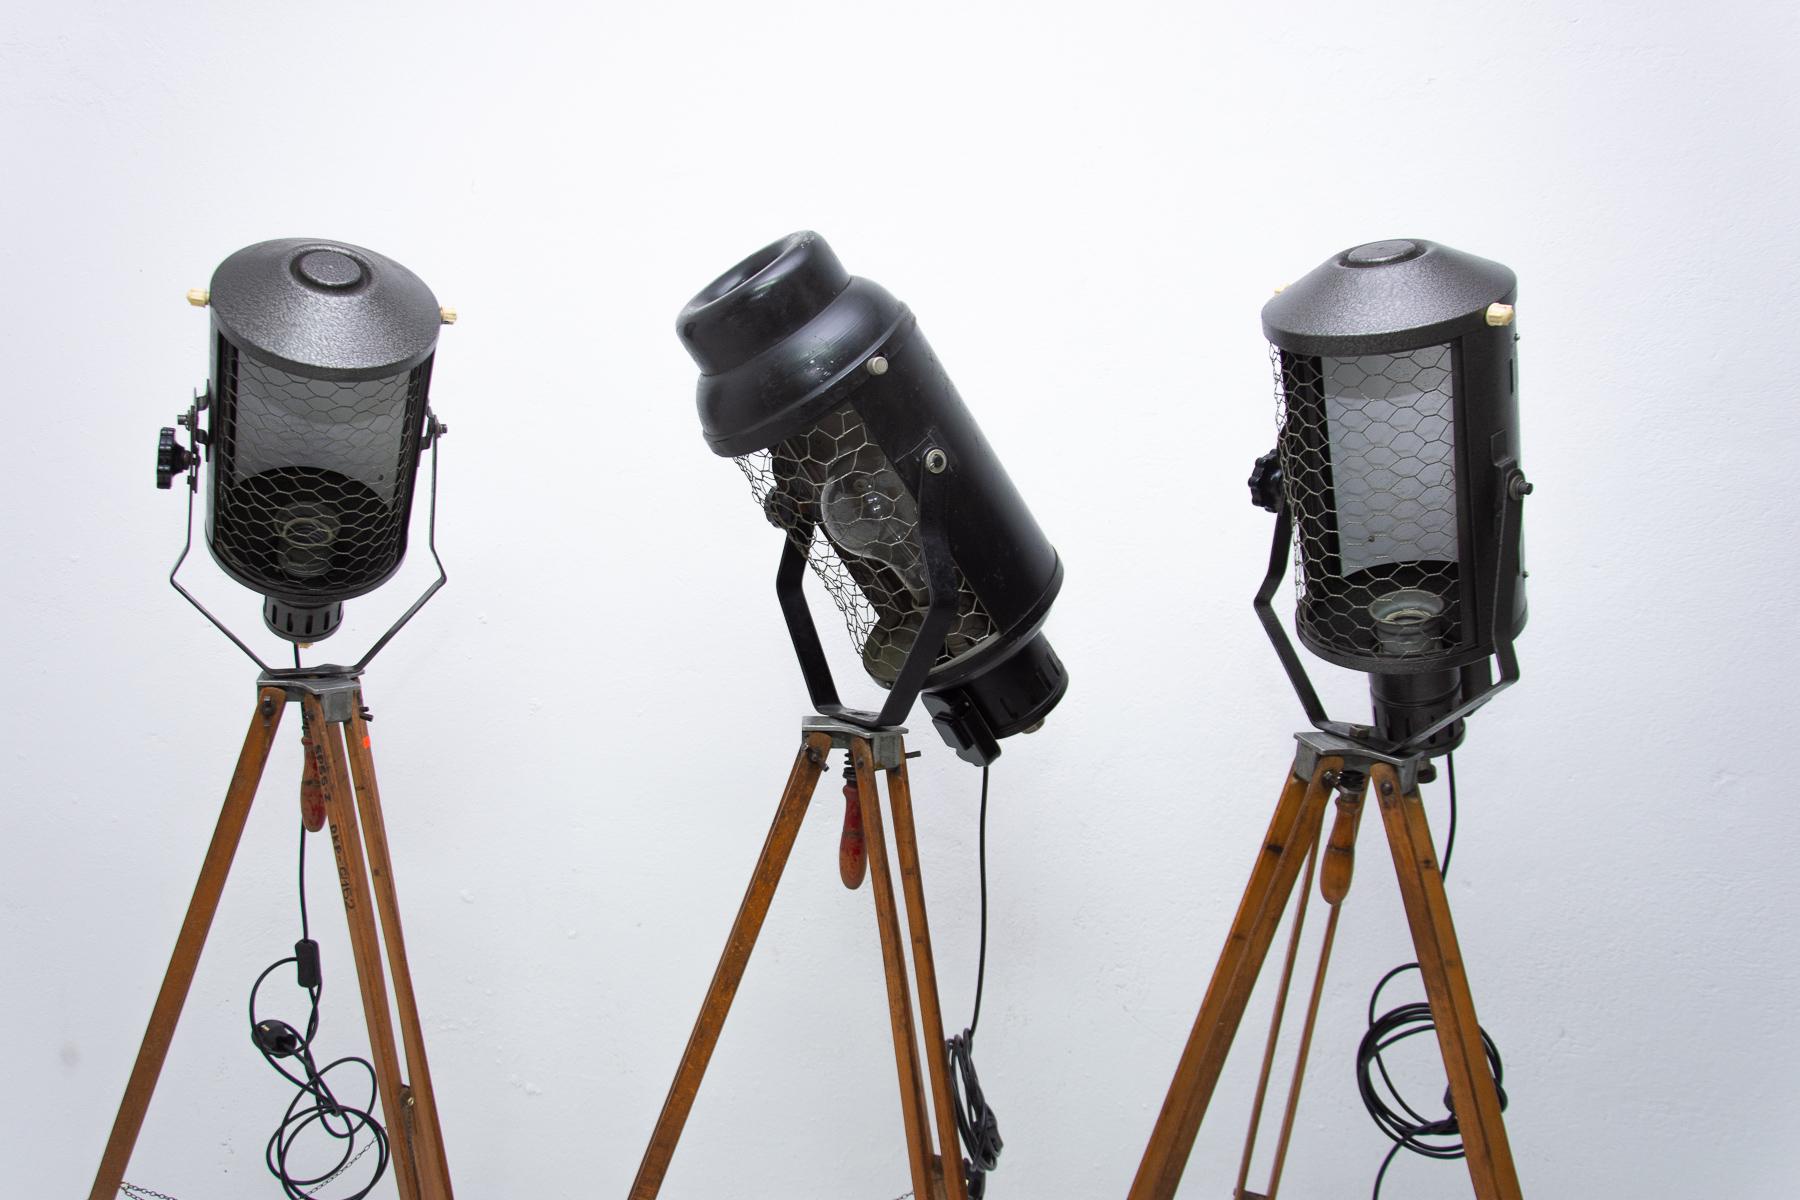 Set of vintage Industrial spotlights on a wooden tripod. They were made in the former Czechoslovakia in the 1970s. Adjustable height and angle. It features an original large rounded shade. Provides a high level of lighting. An outstanding and